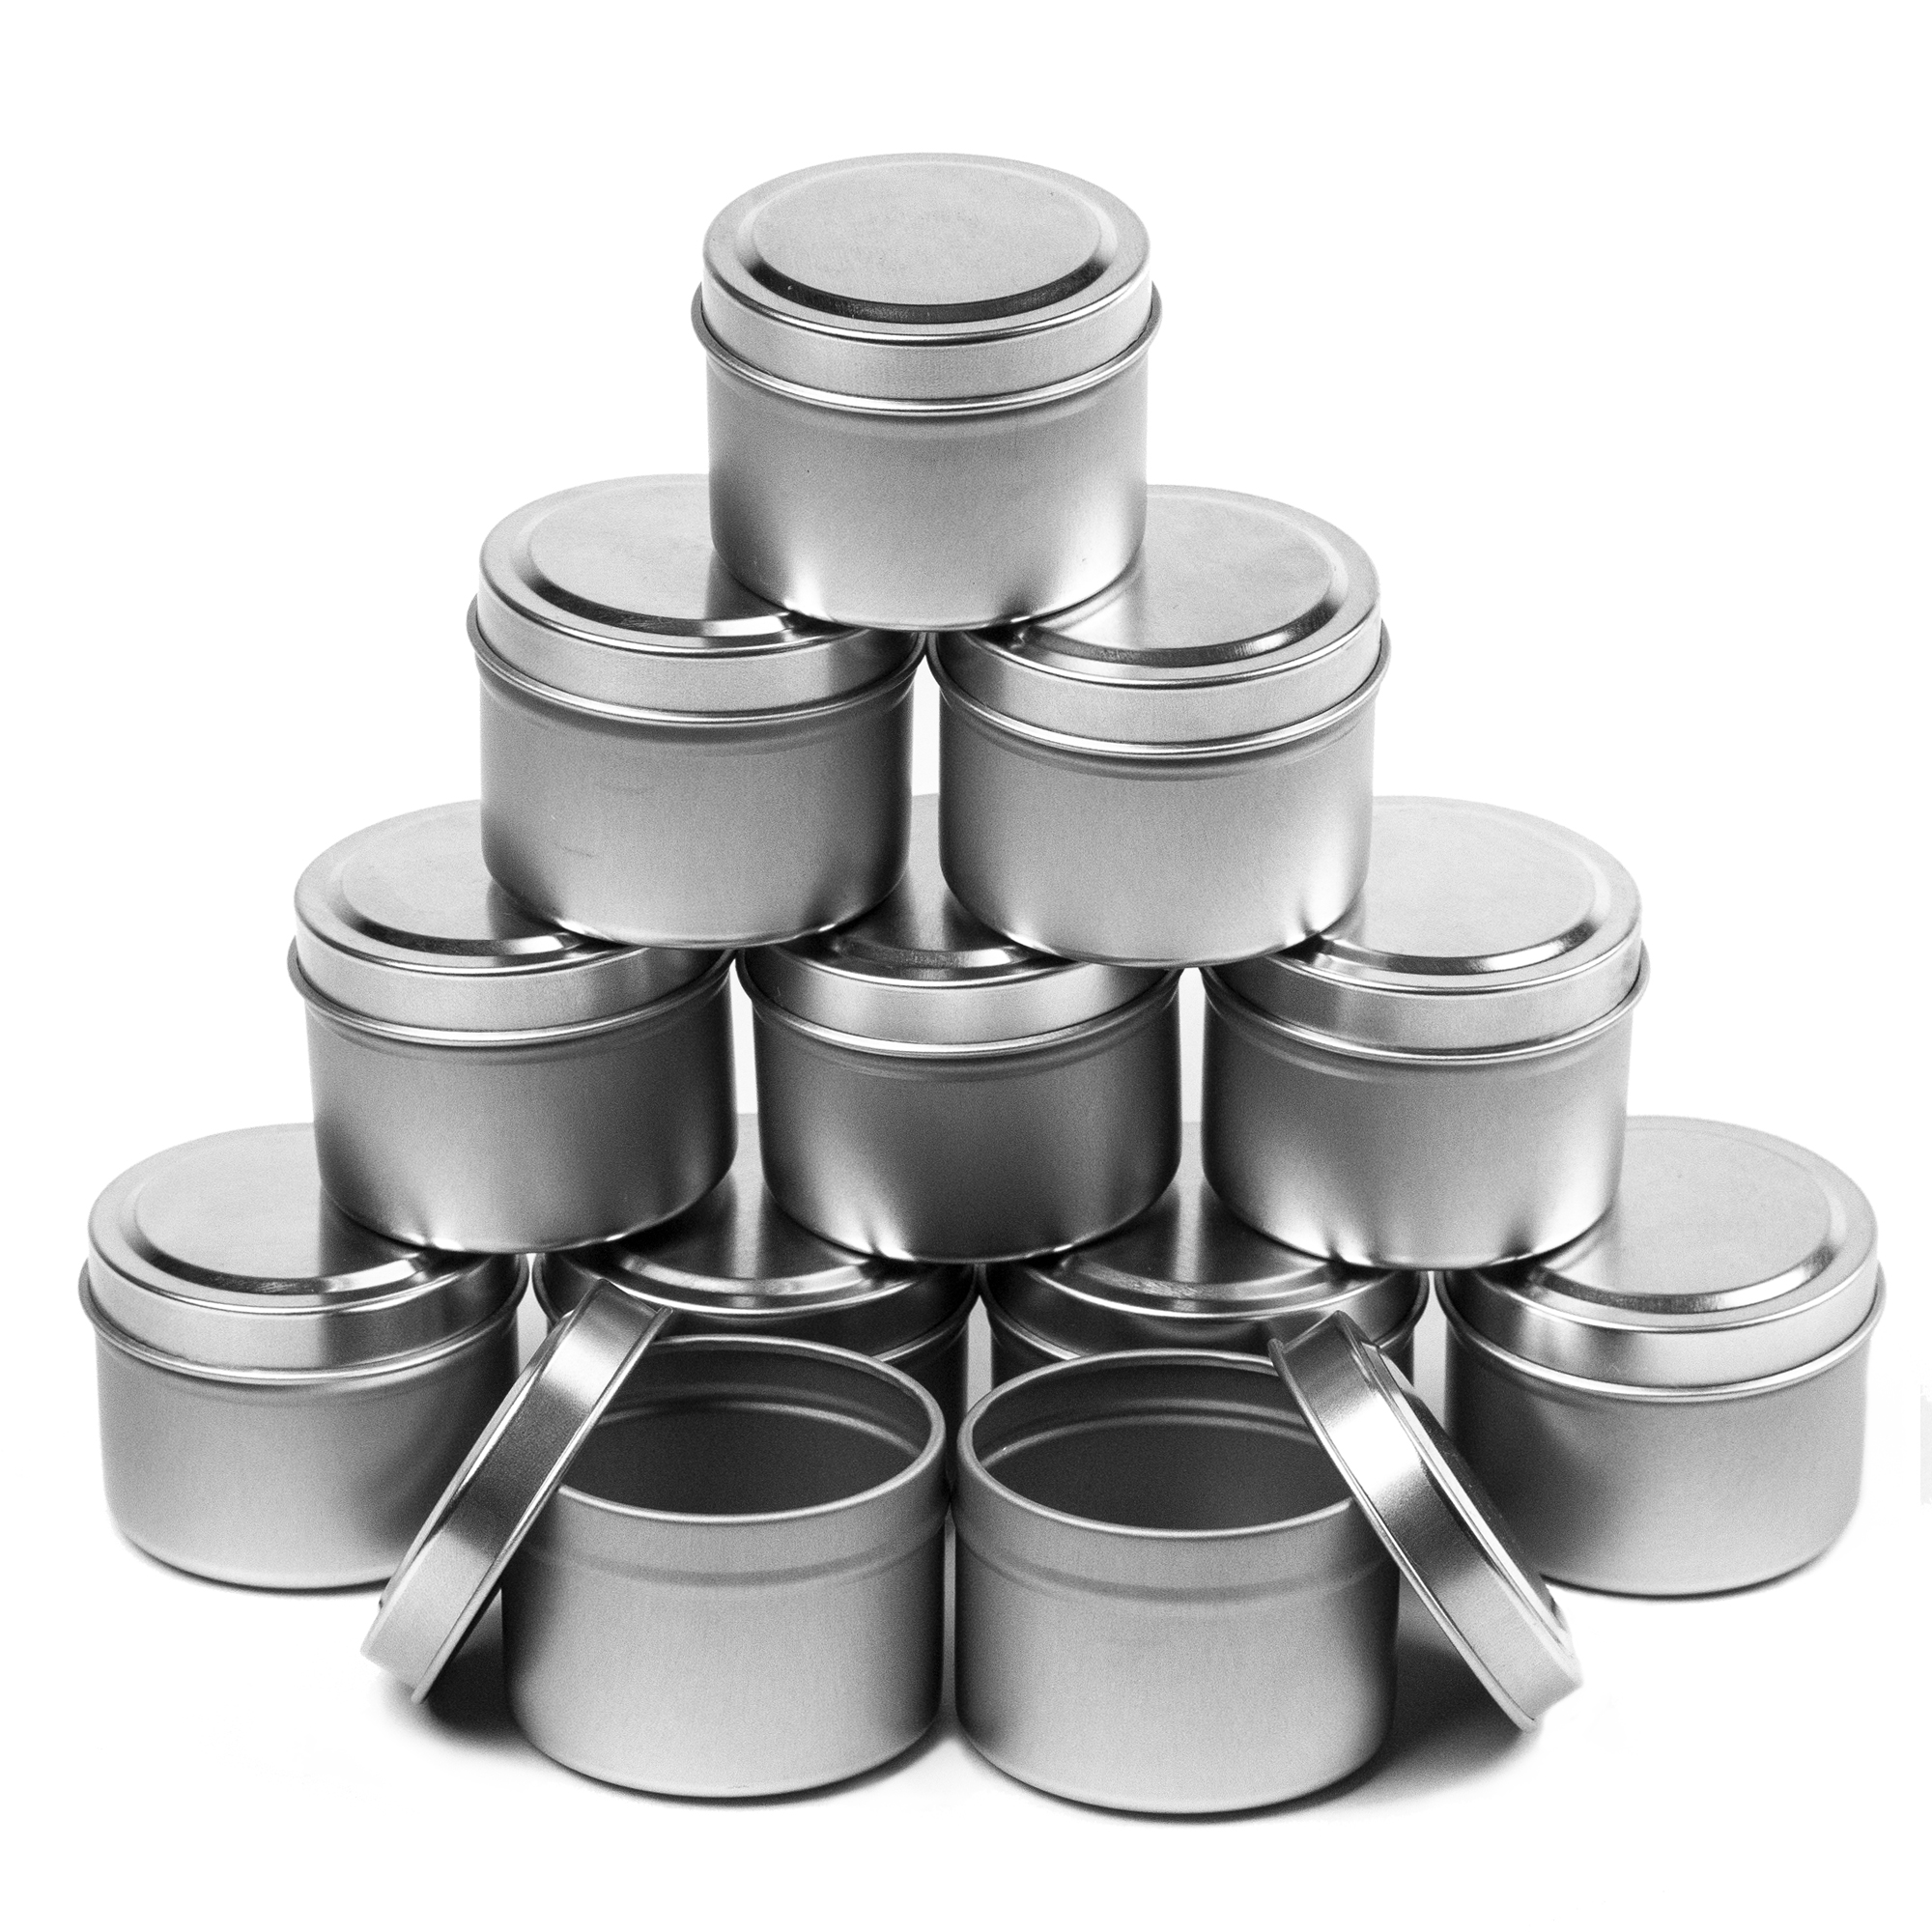 4 oz. White Candle Tin - CandleScience